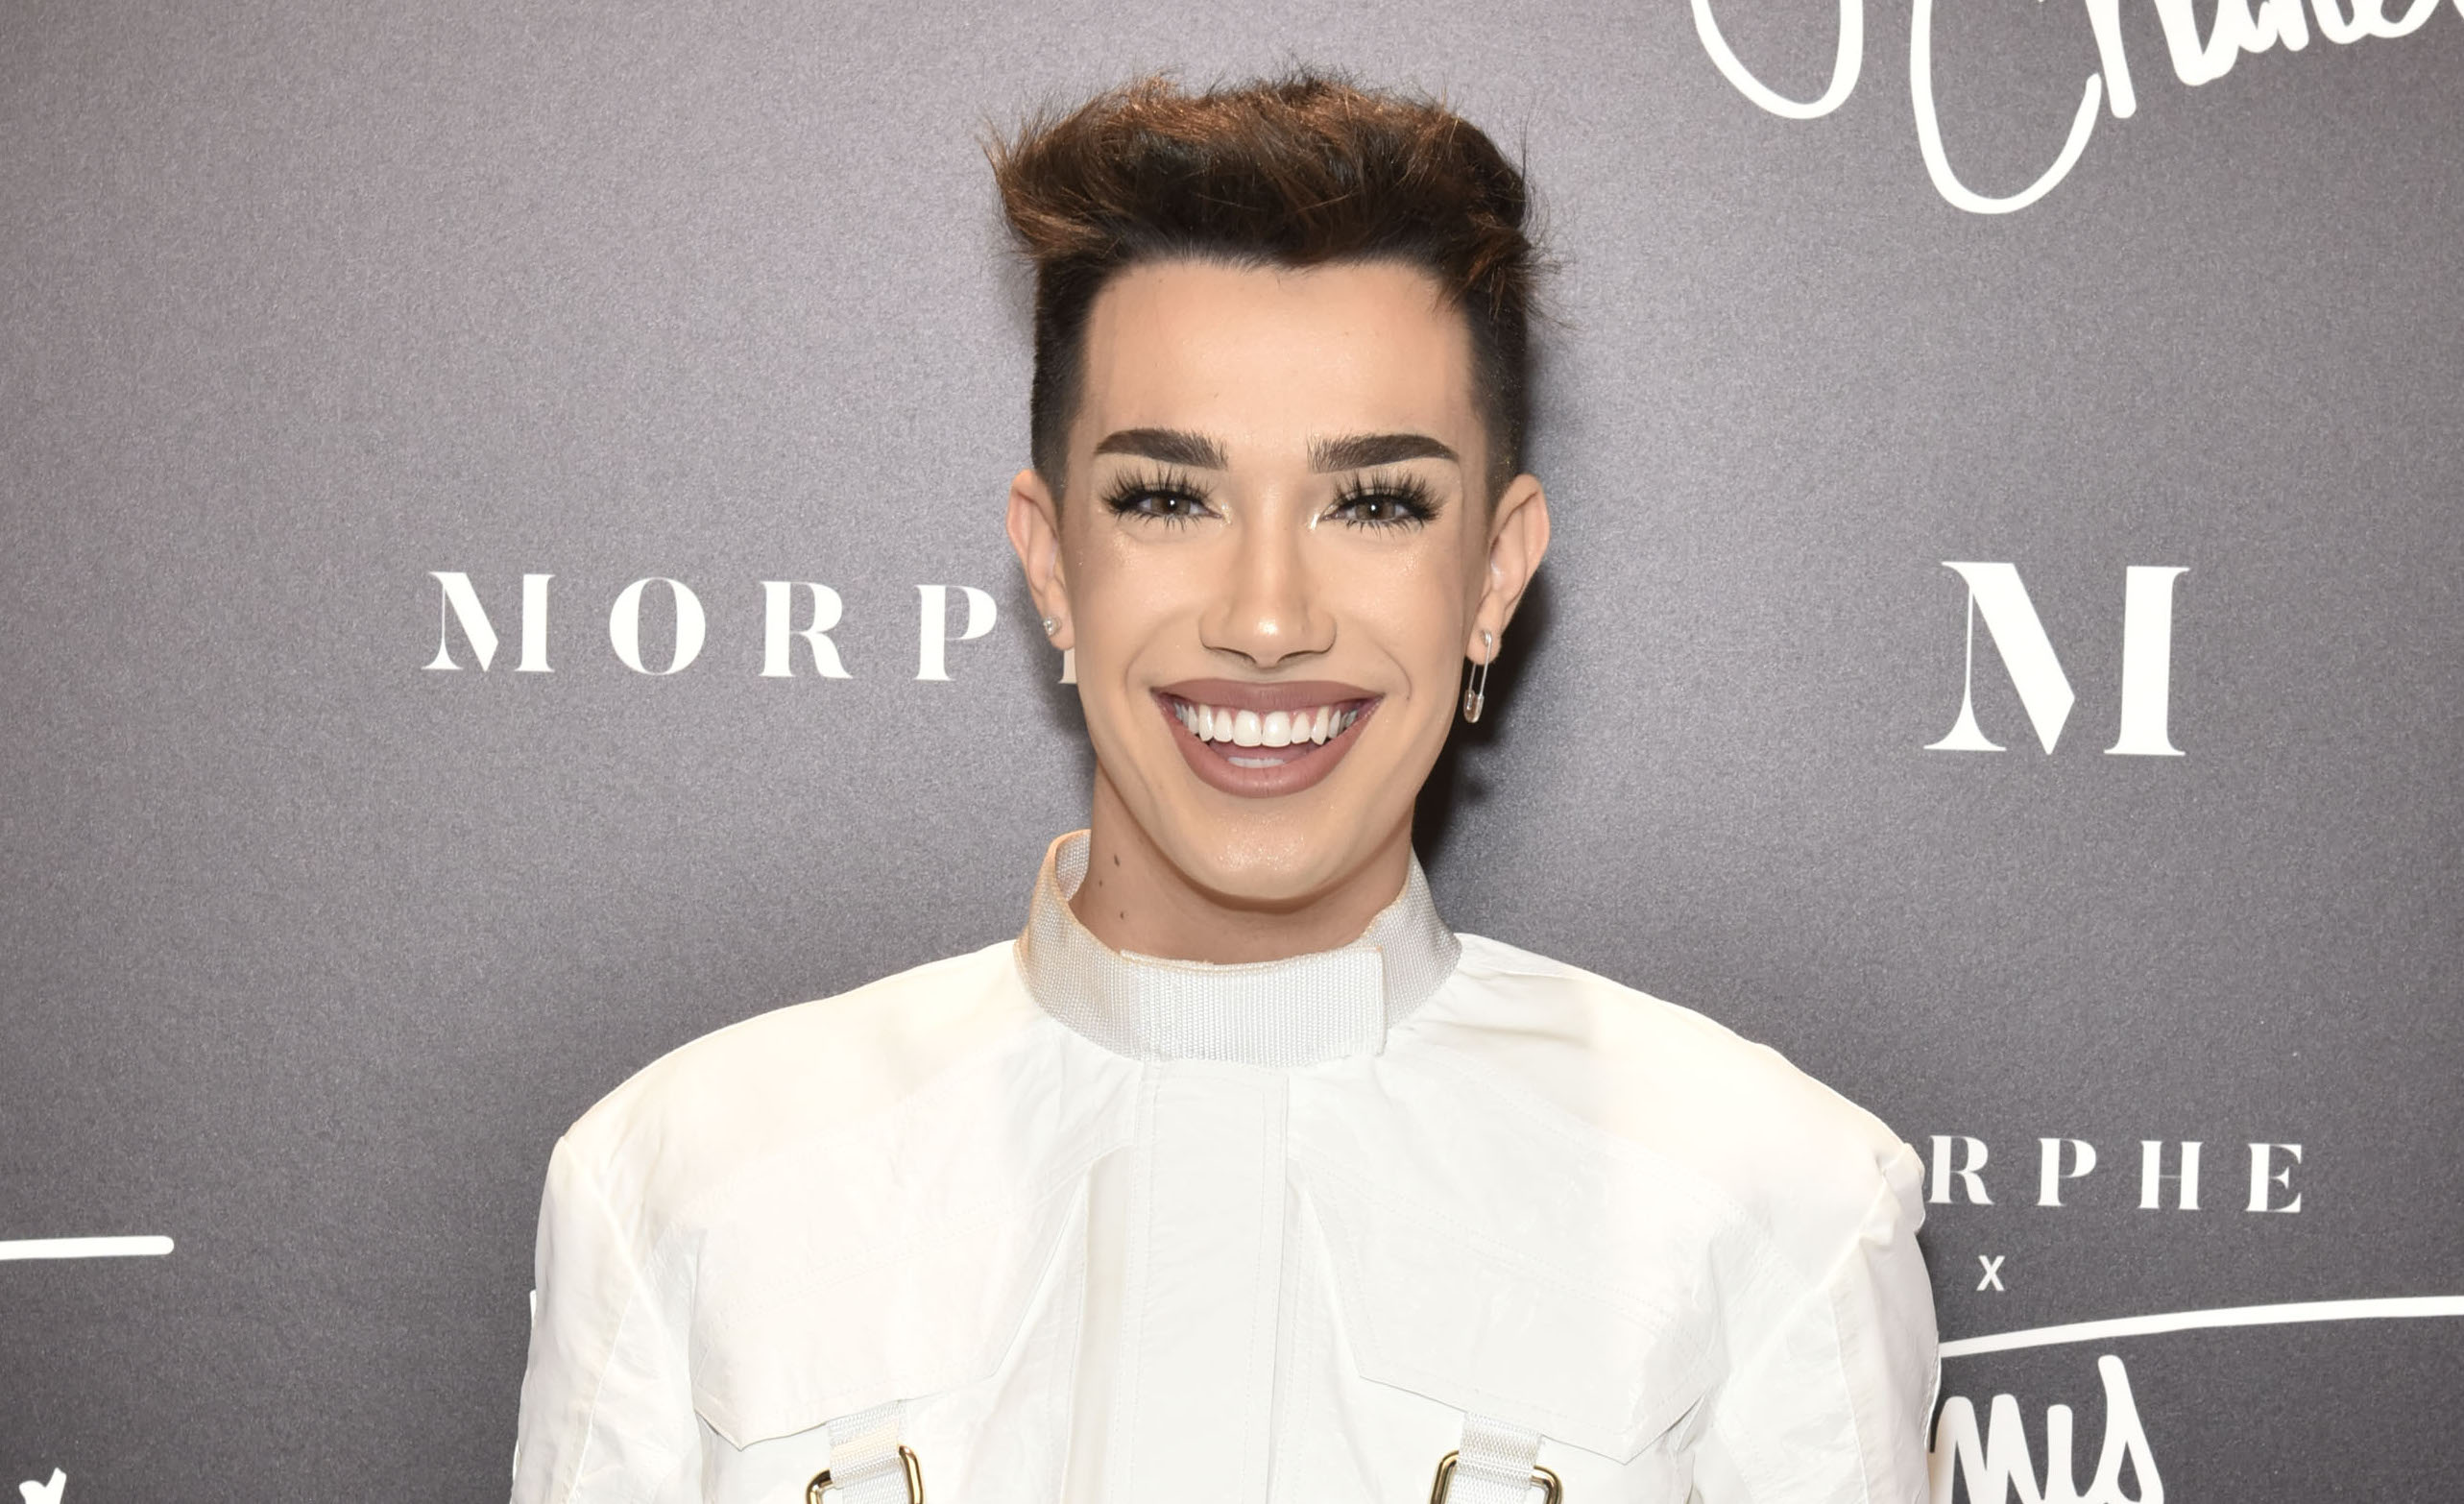 James Charles' Sisters Tour: Cancelation, Dates, Locations, More | J-14